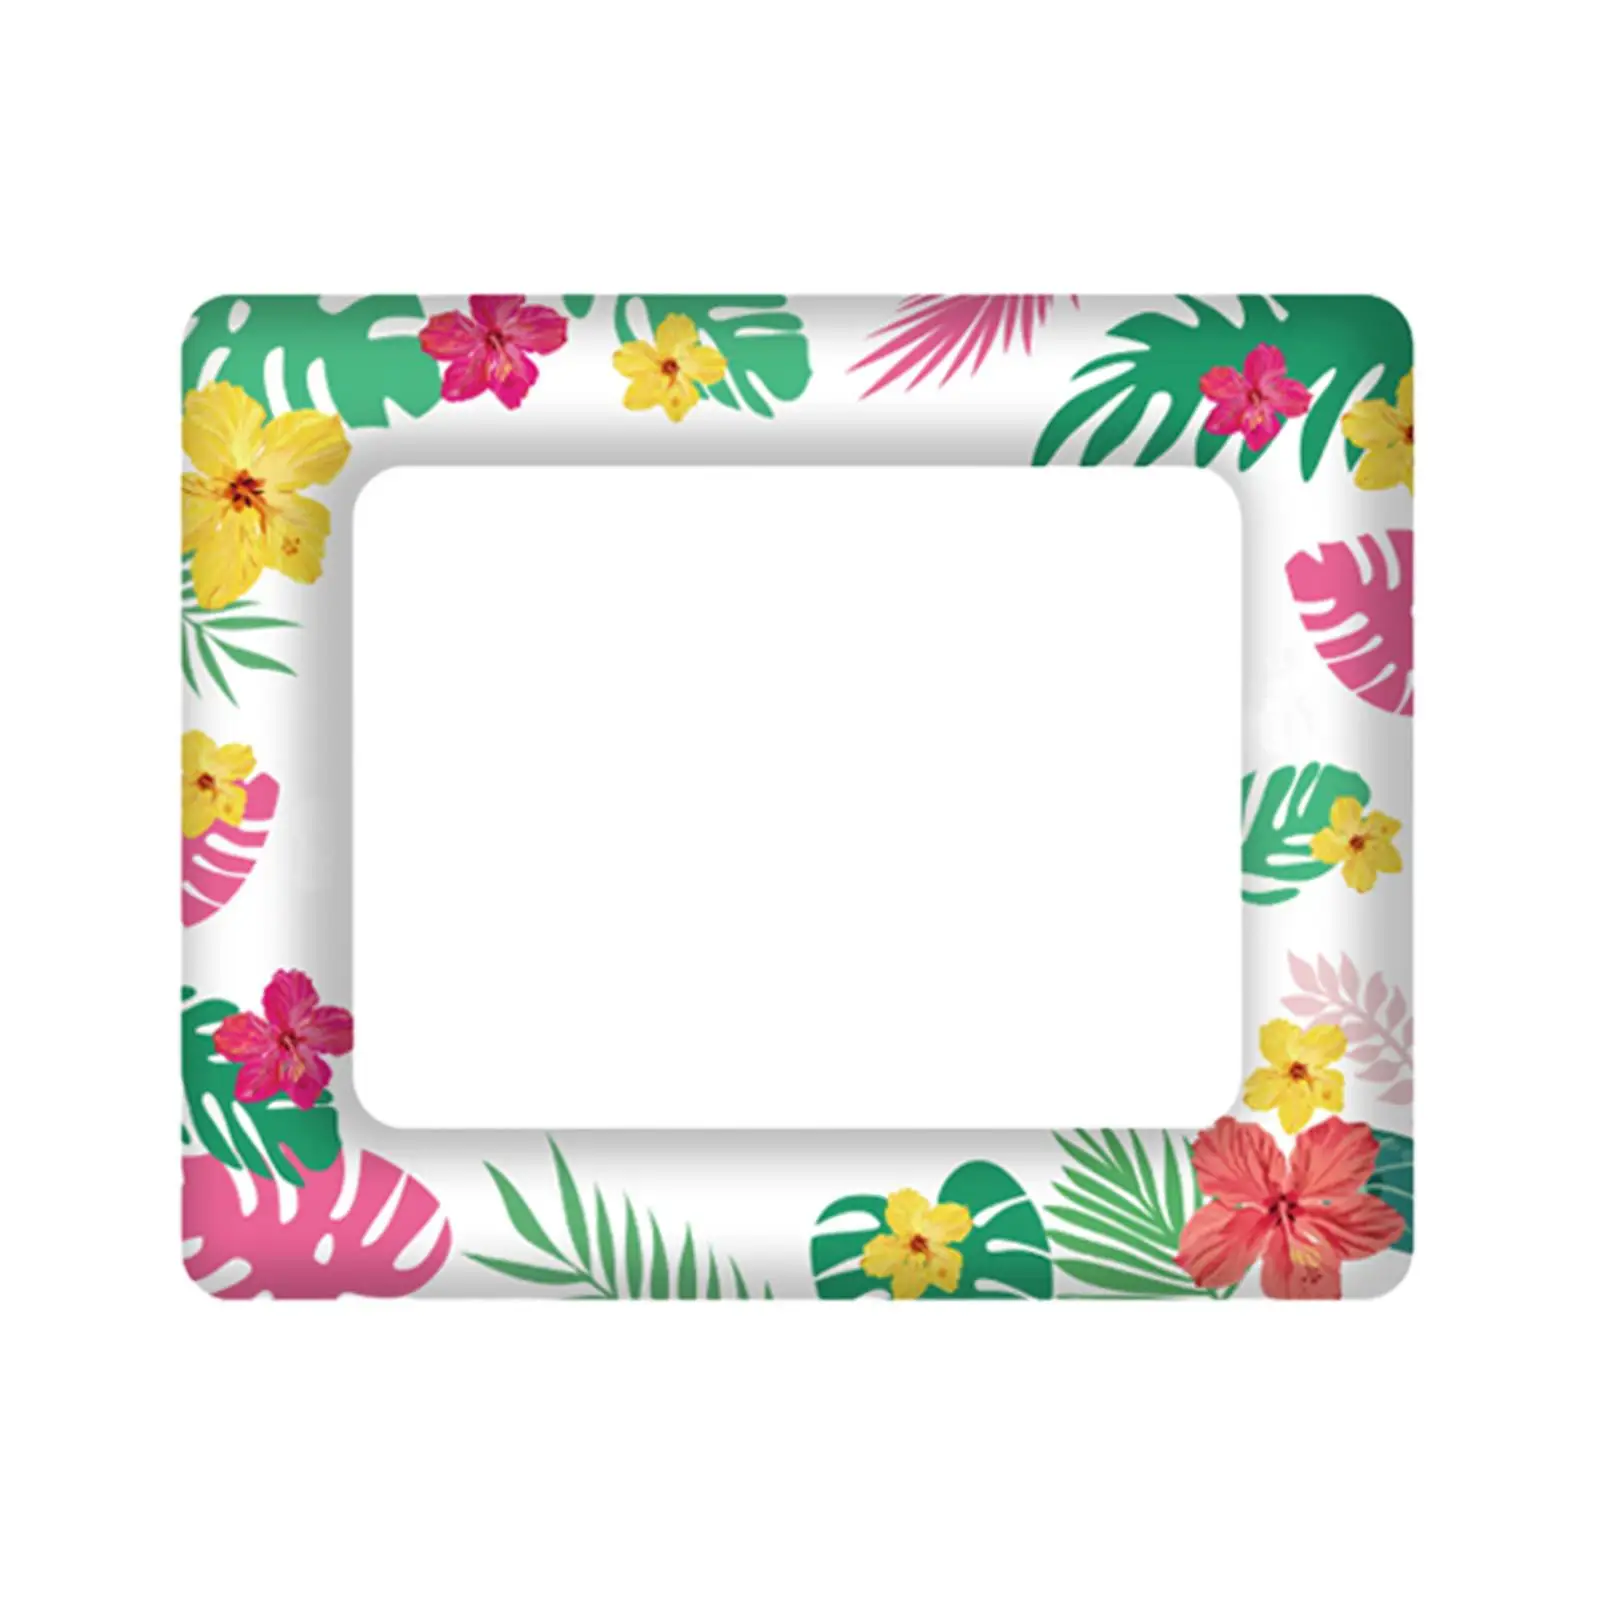 Selfie Photo Frame Lightweight Photo Booth Frame for Carnival Party Birthday